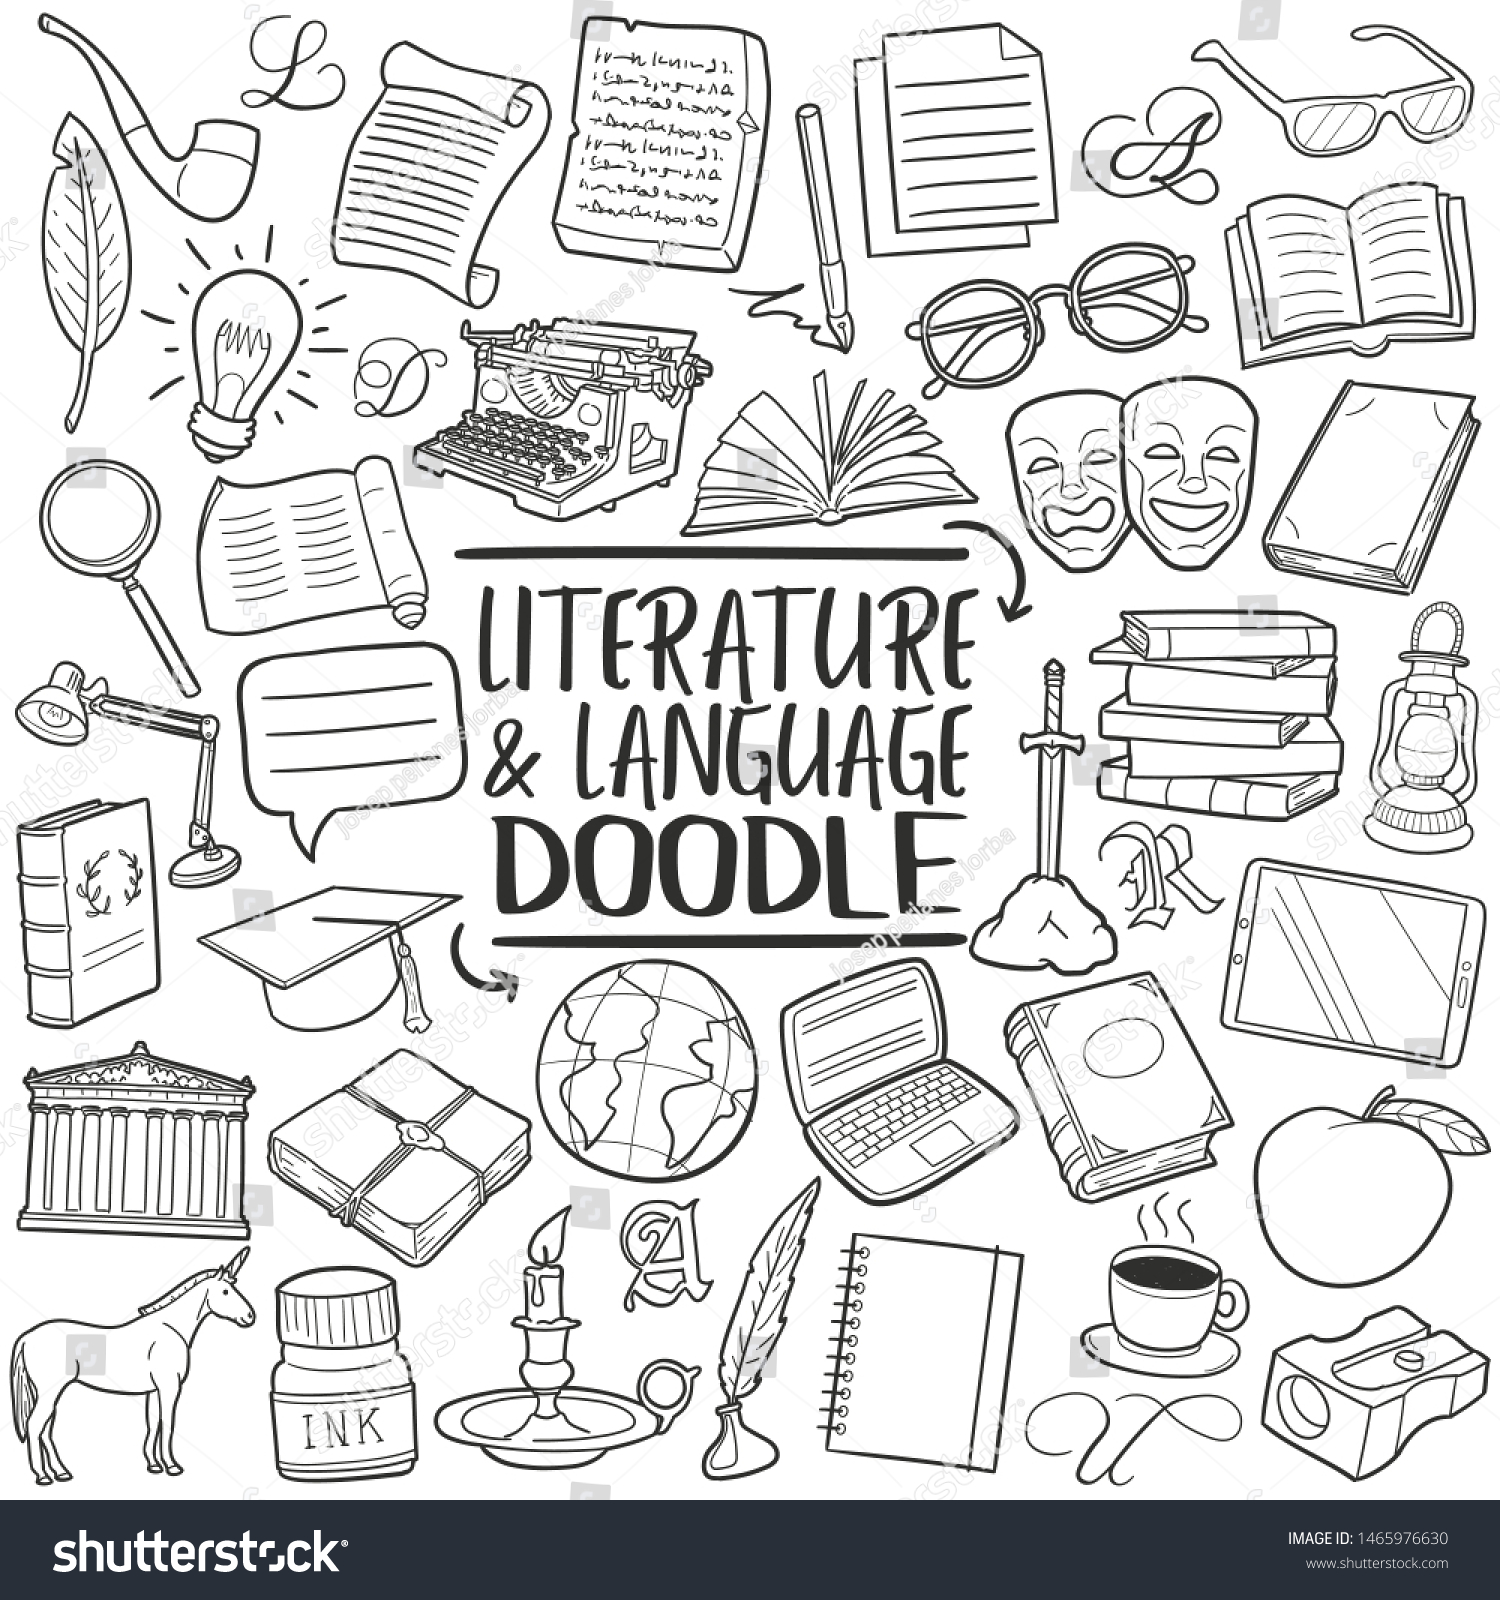 Literature Language School Traditional Doodle Icons Stock Vector ...